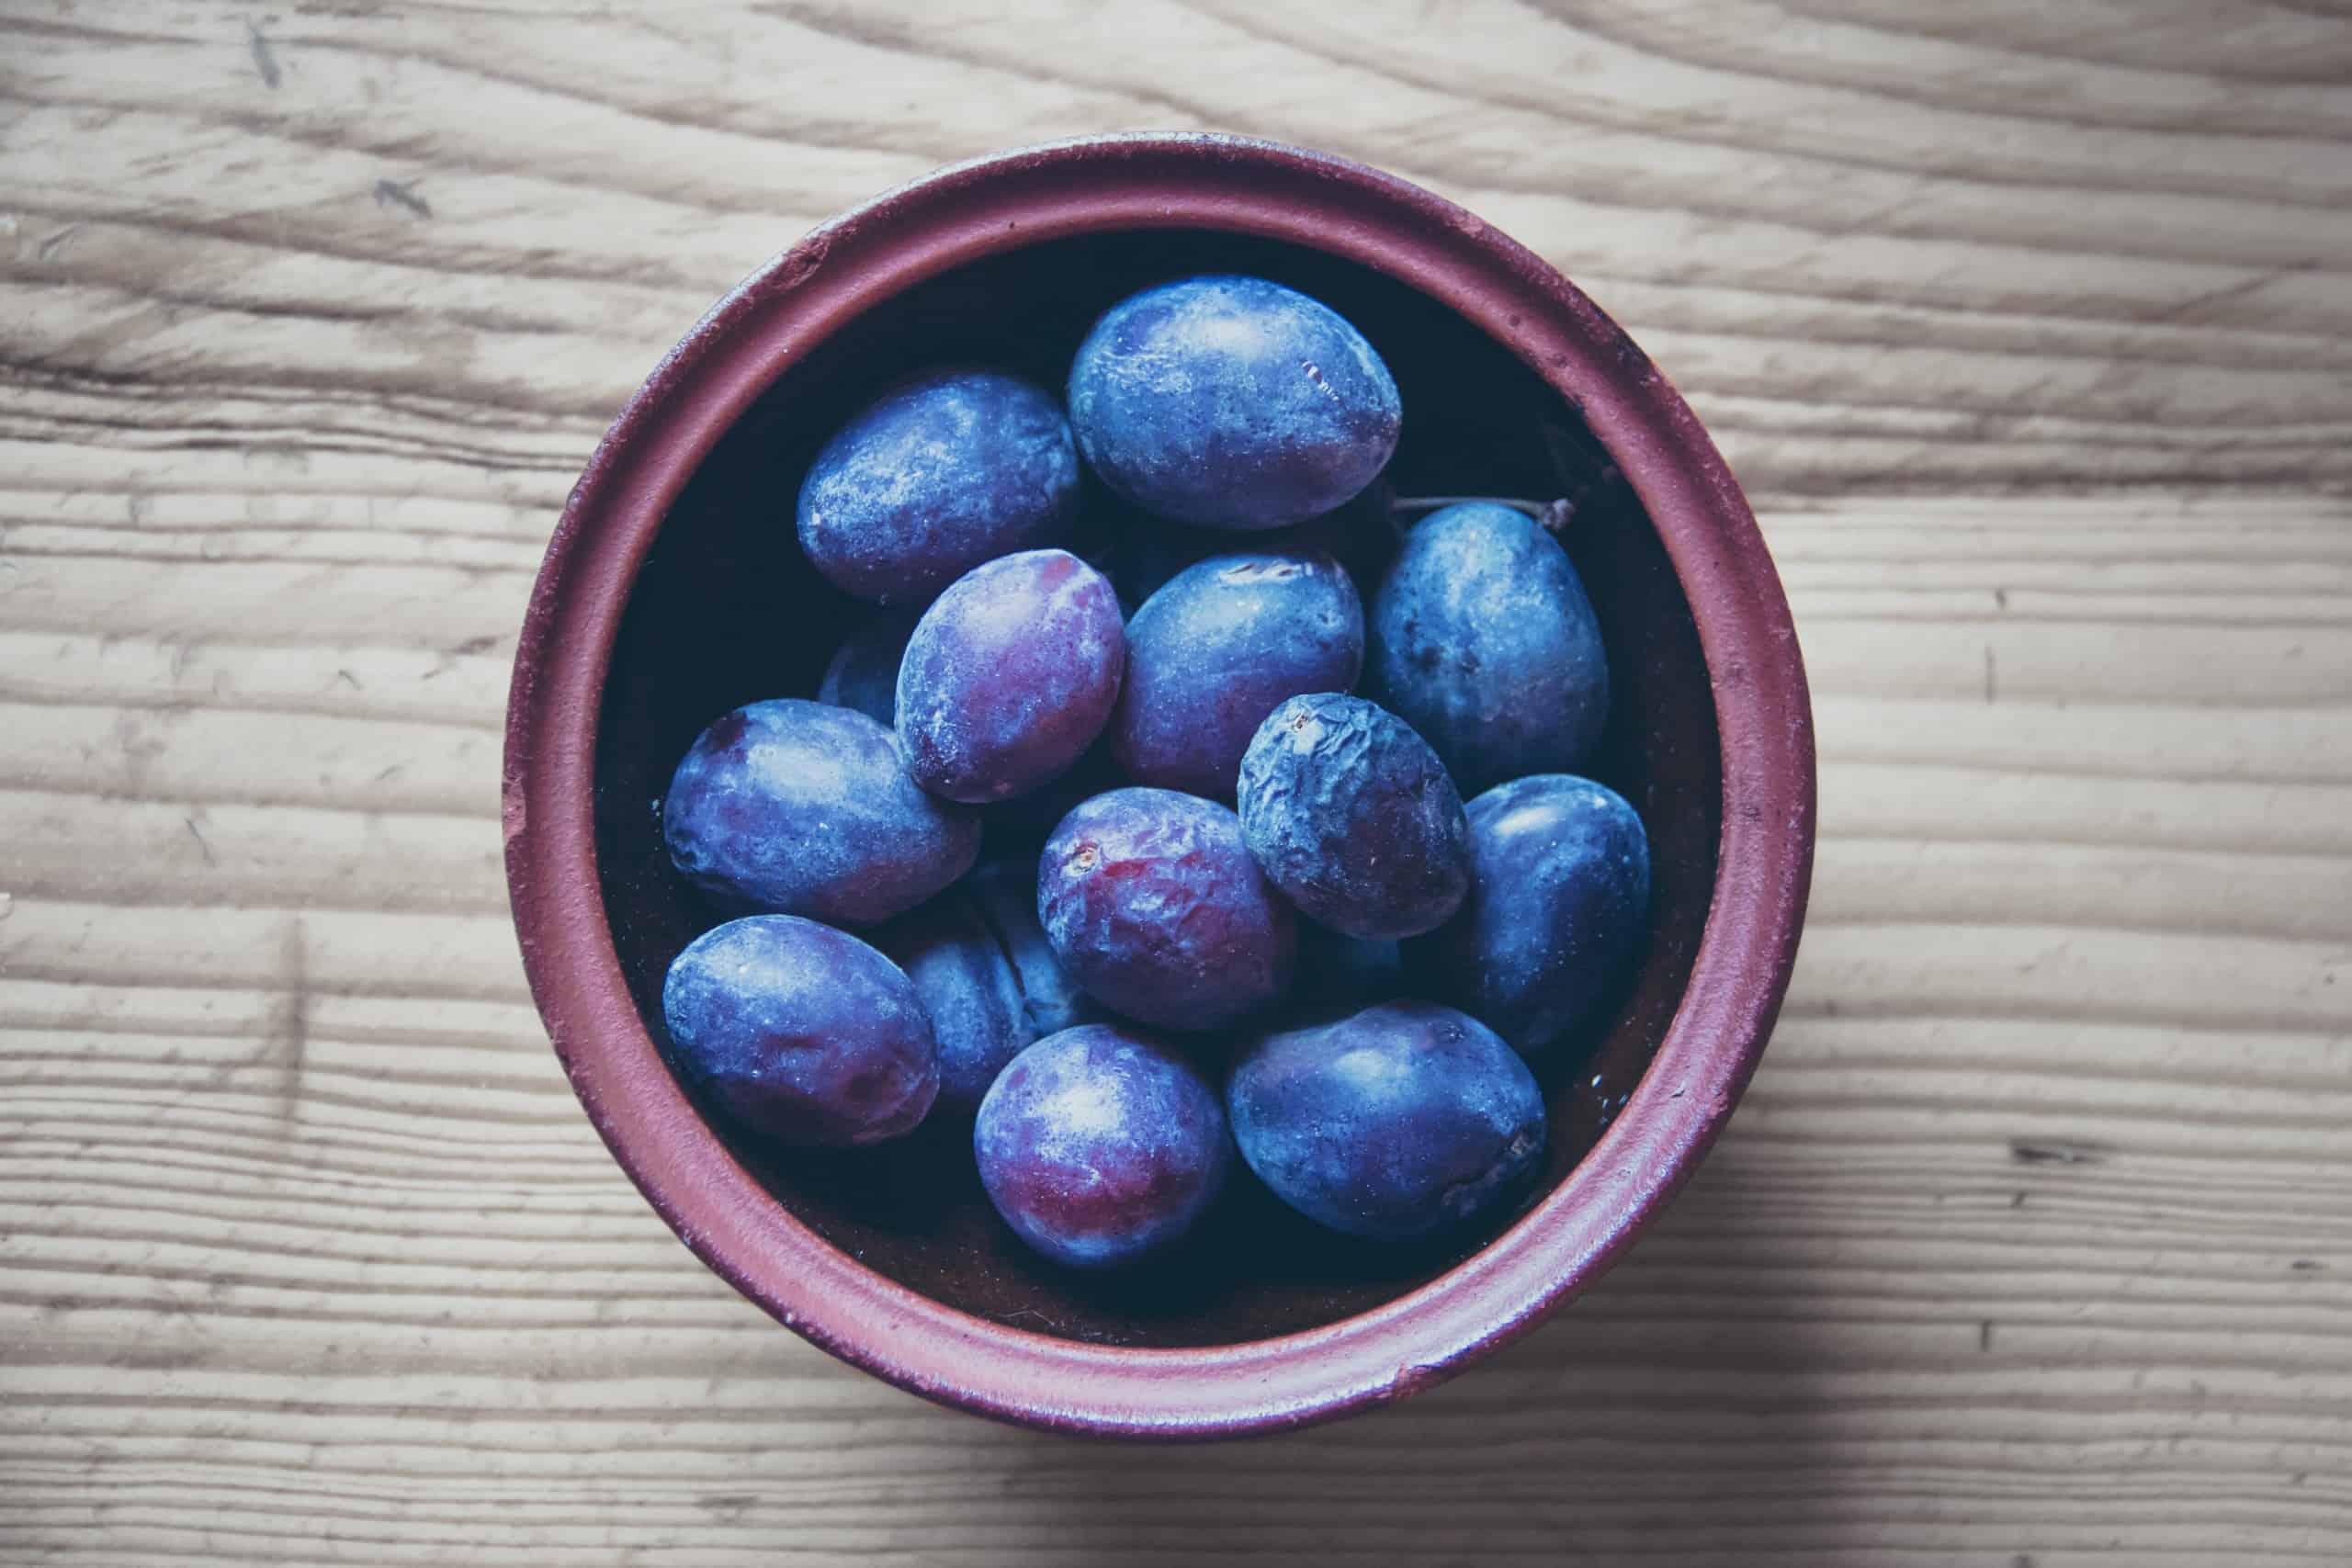 Dietitian Shares 13 Health Benefits of Eating Plums